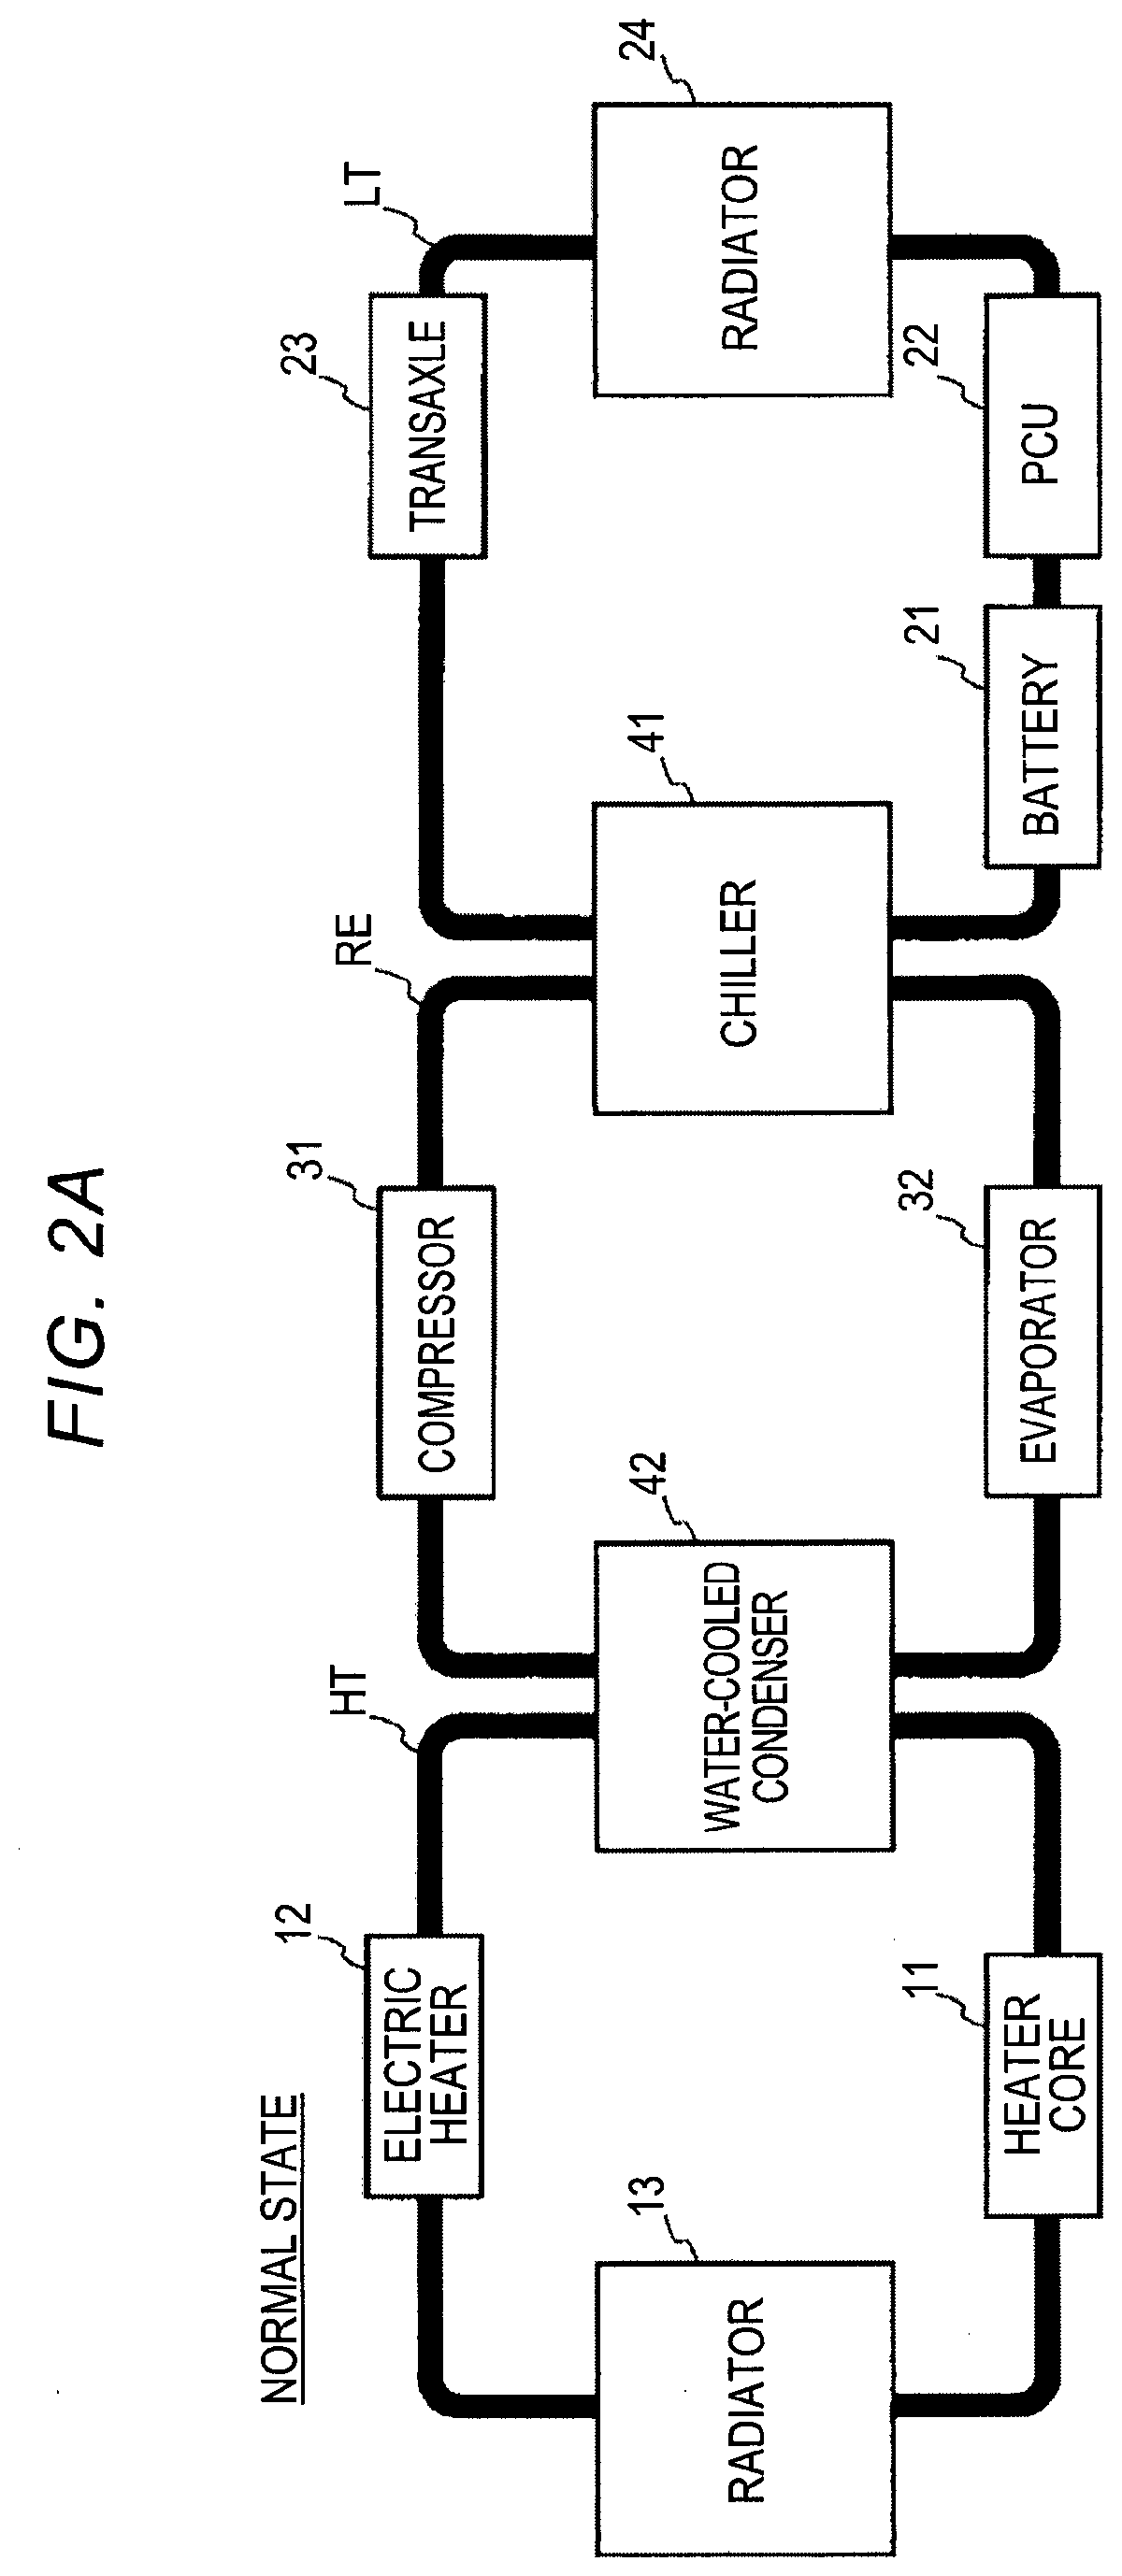 Thermal request mediating device